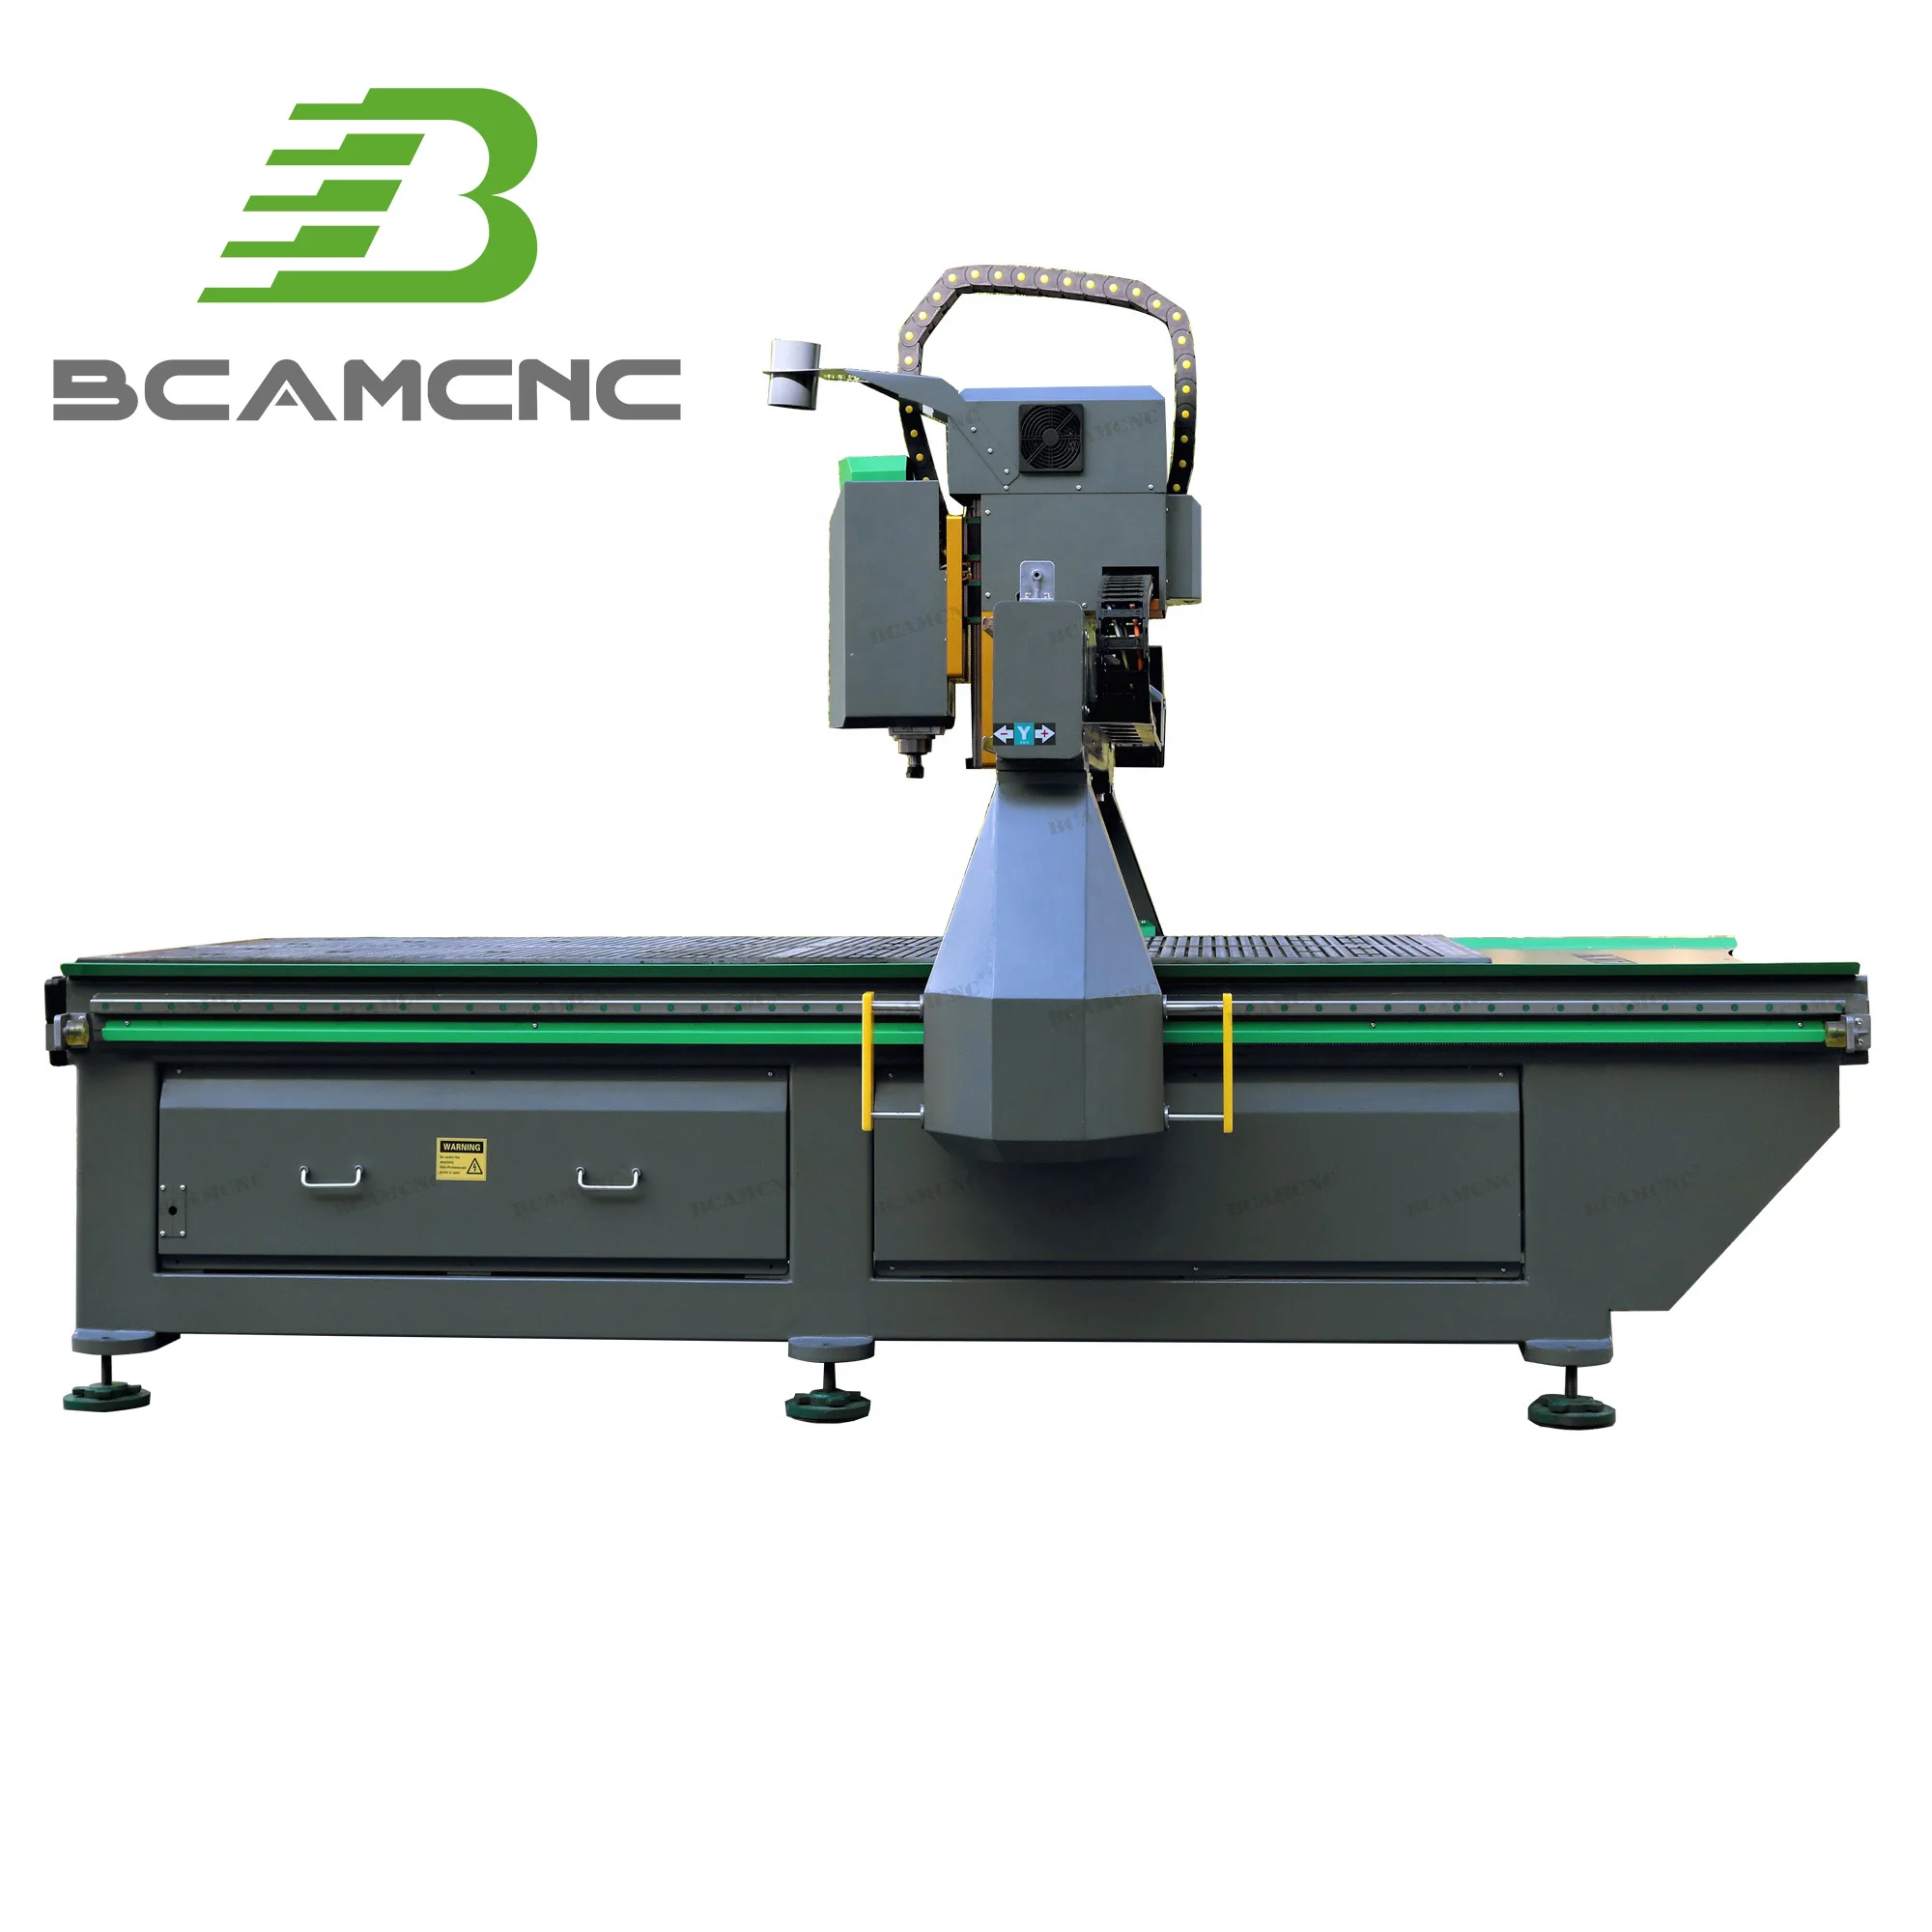 4x8 vacuum table for cnc route advertising cutting machine